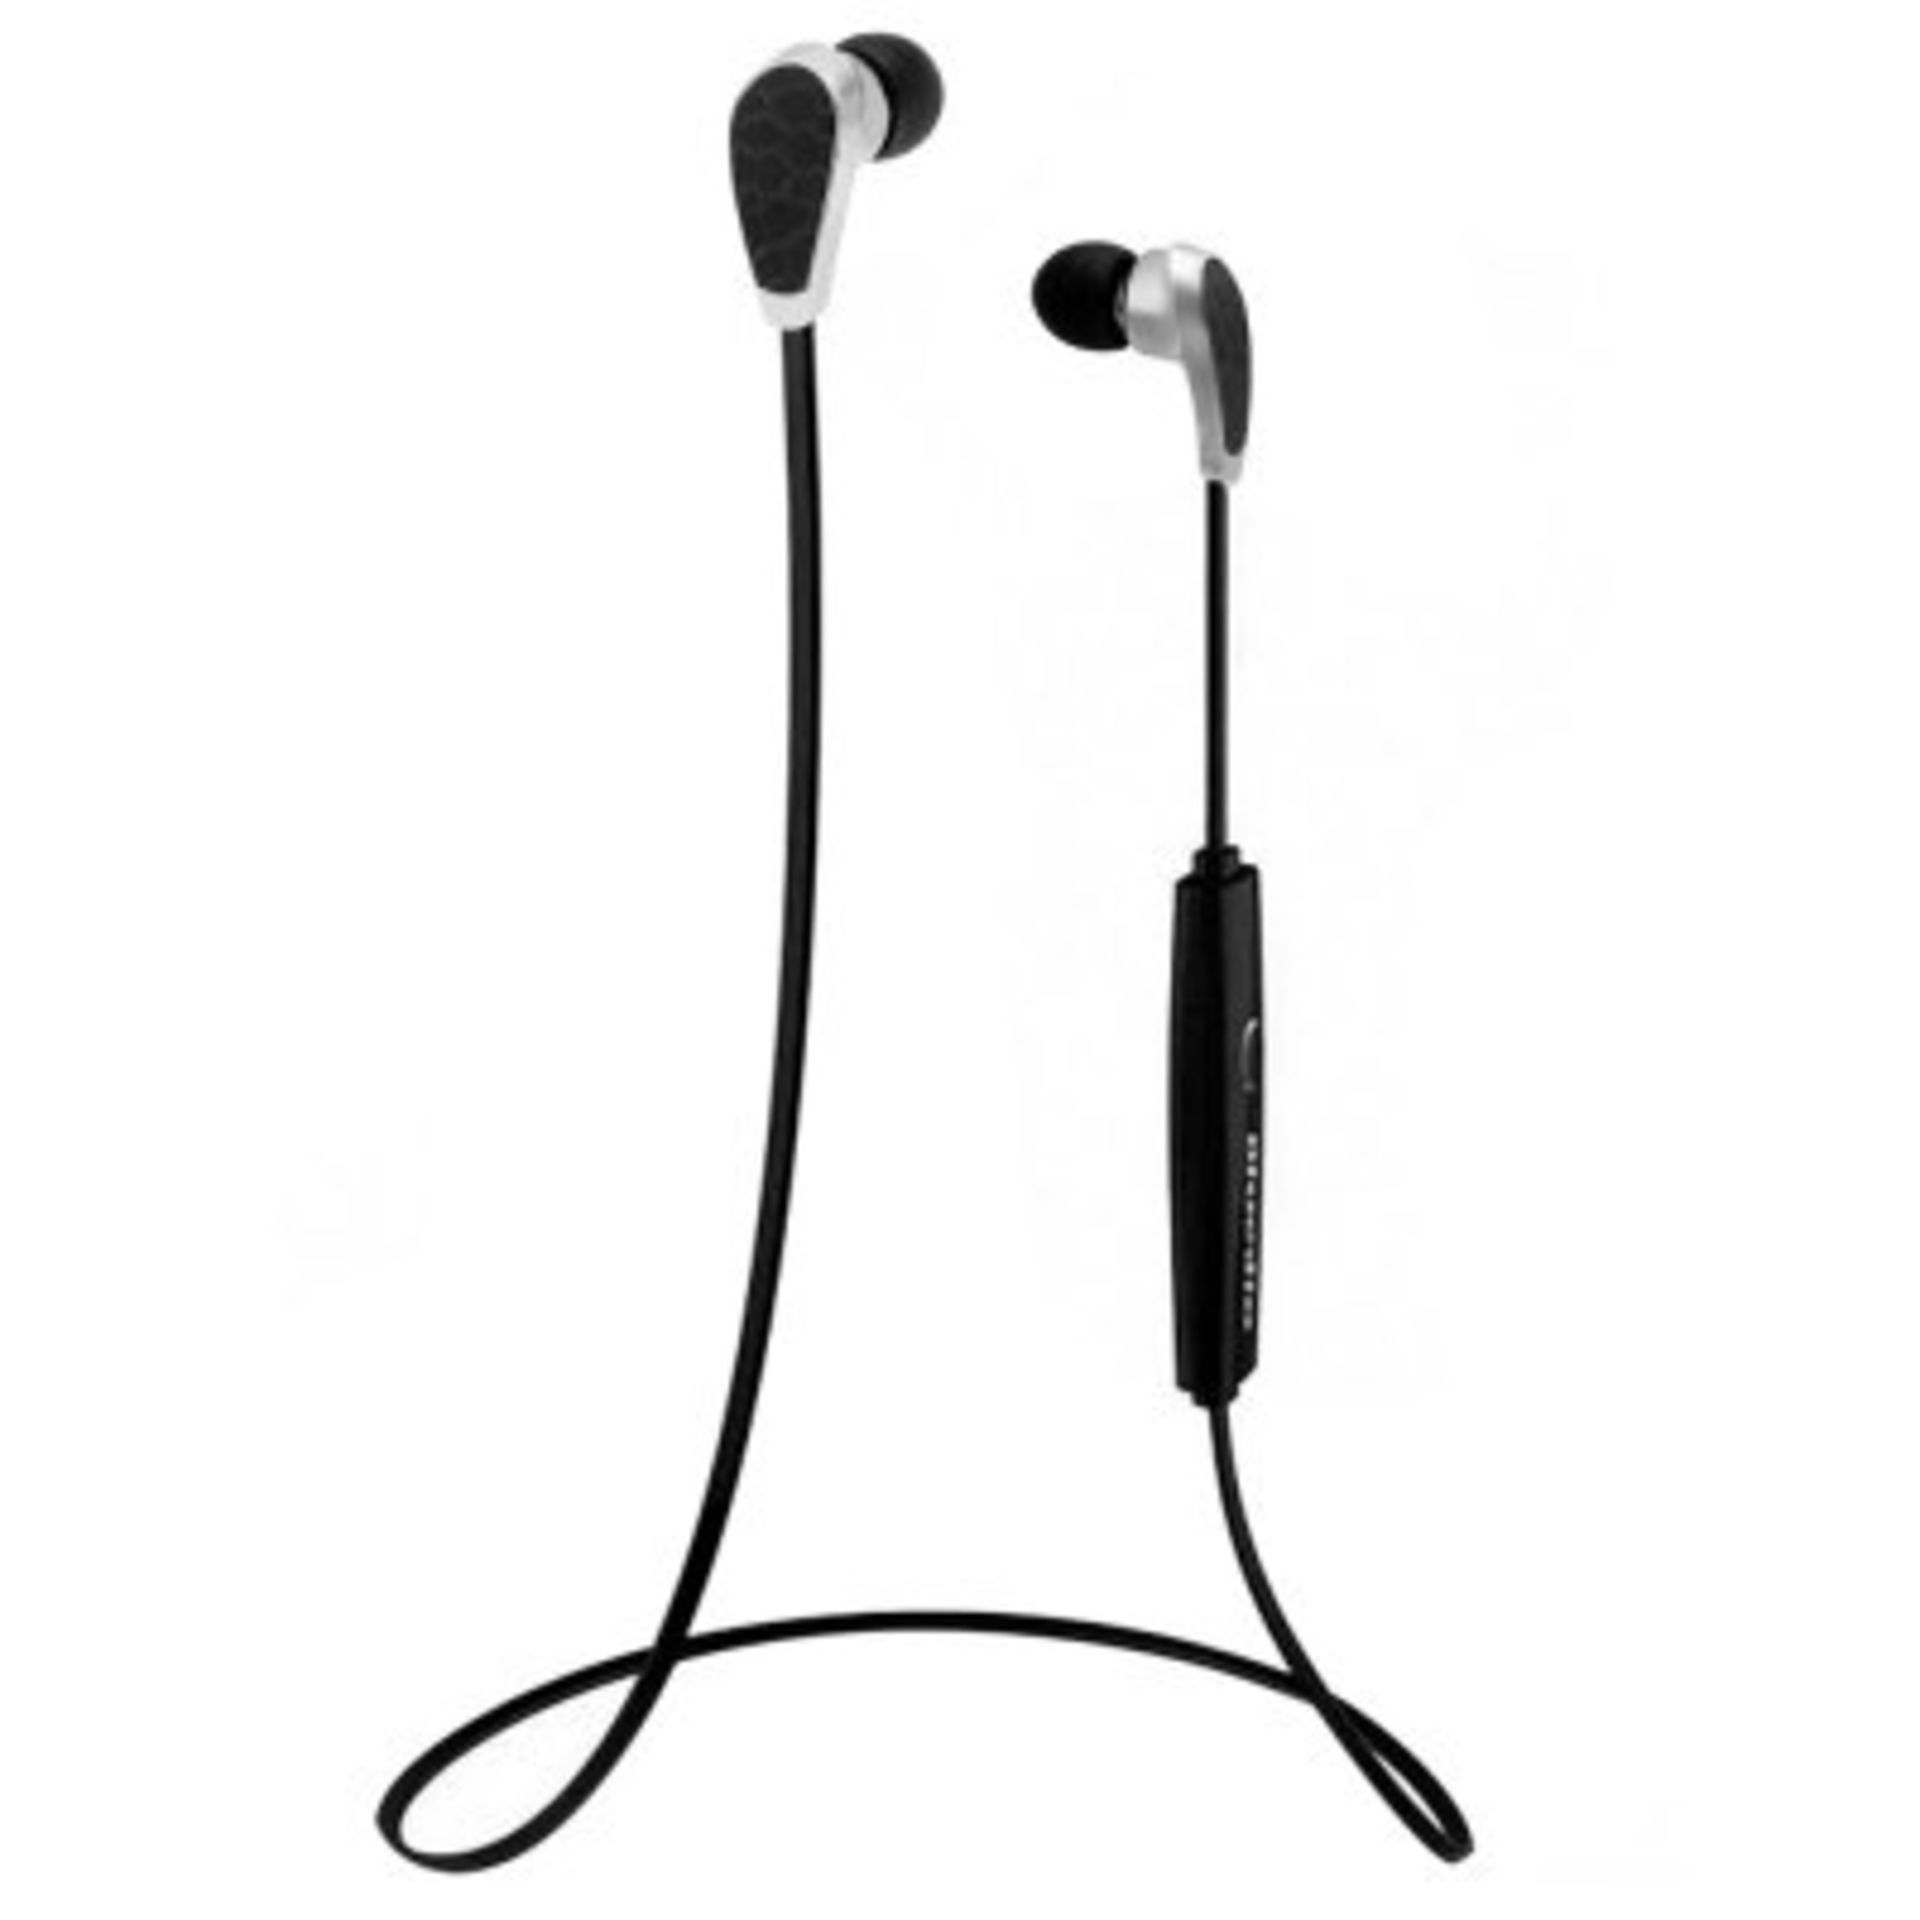 V *TRADE QTY* Brand New Pair of Bluetooth Earphones/Headset (All Boxed) - Colours and Styles/Makes - Image 5 of 7